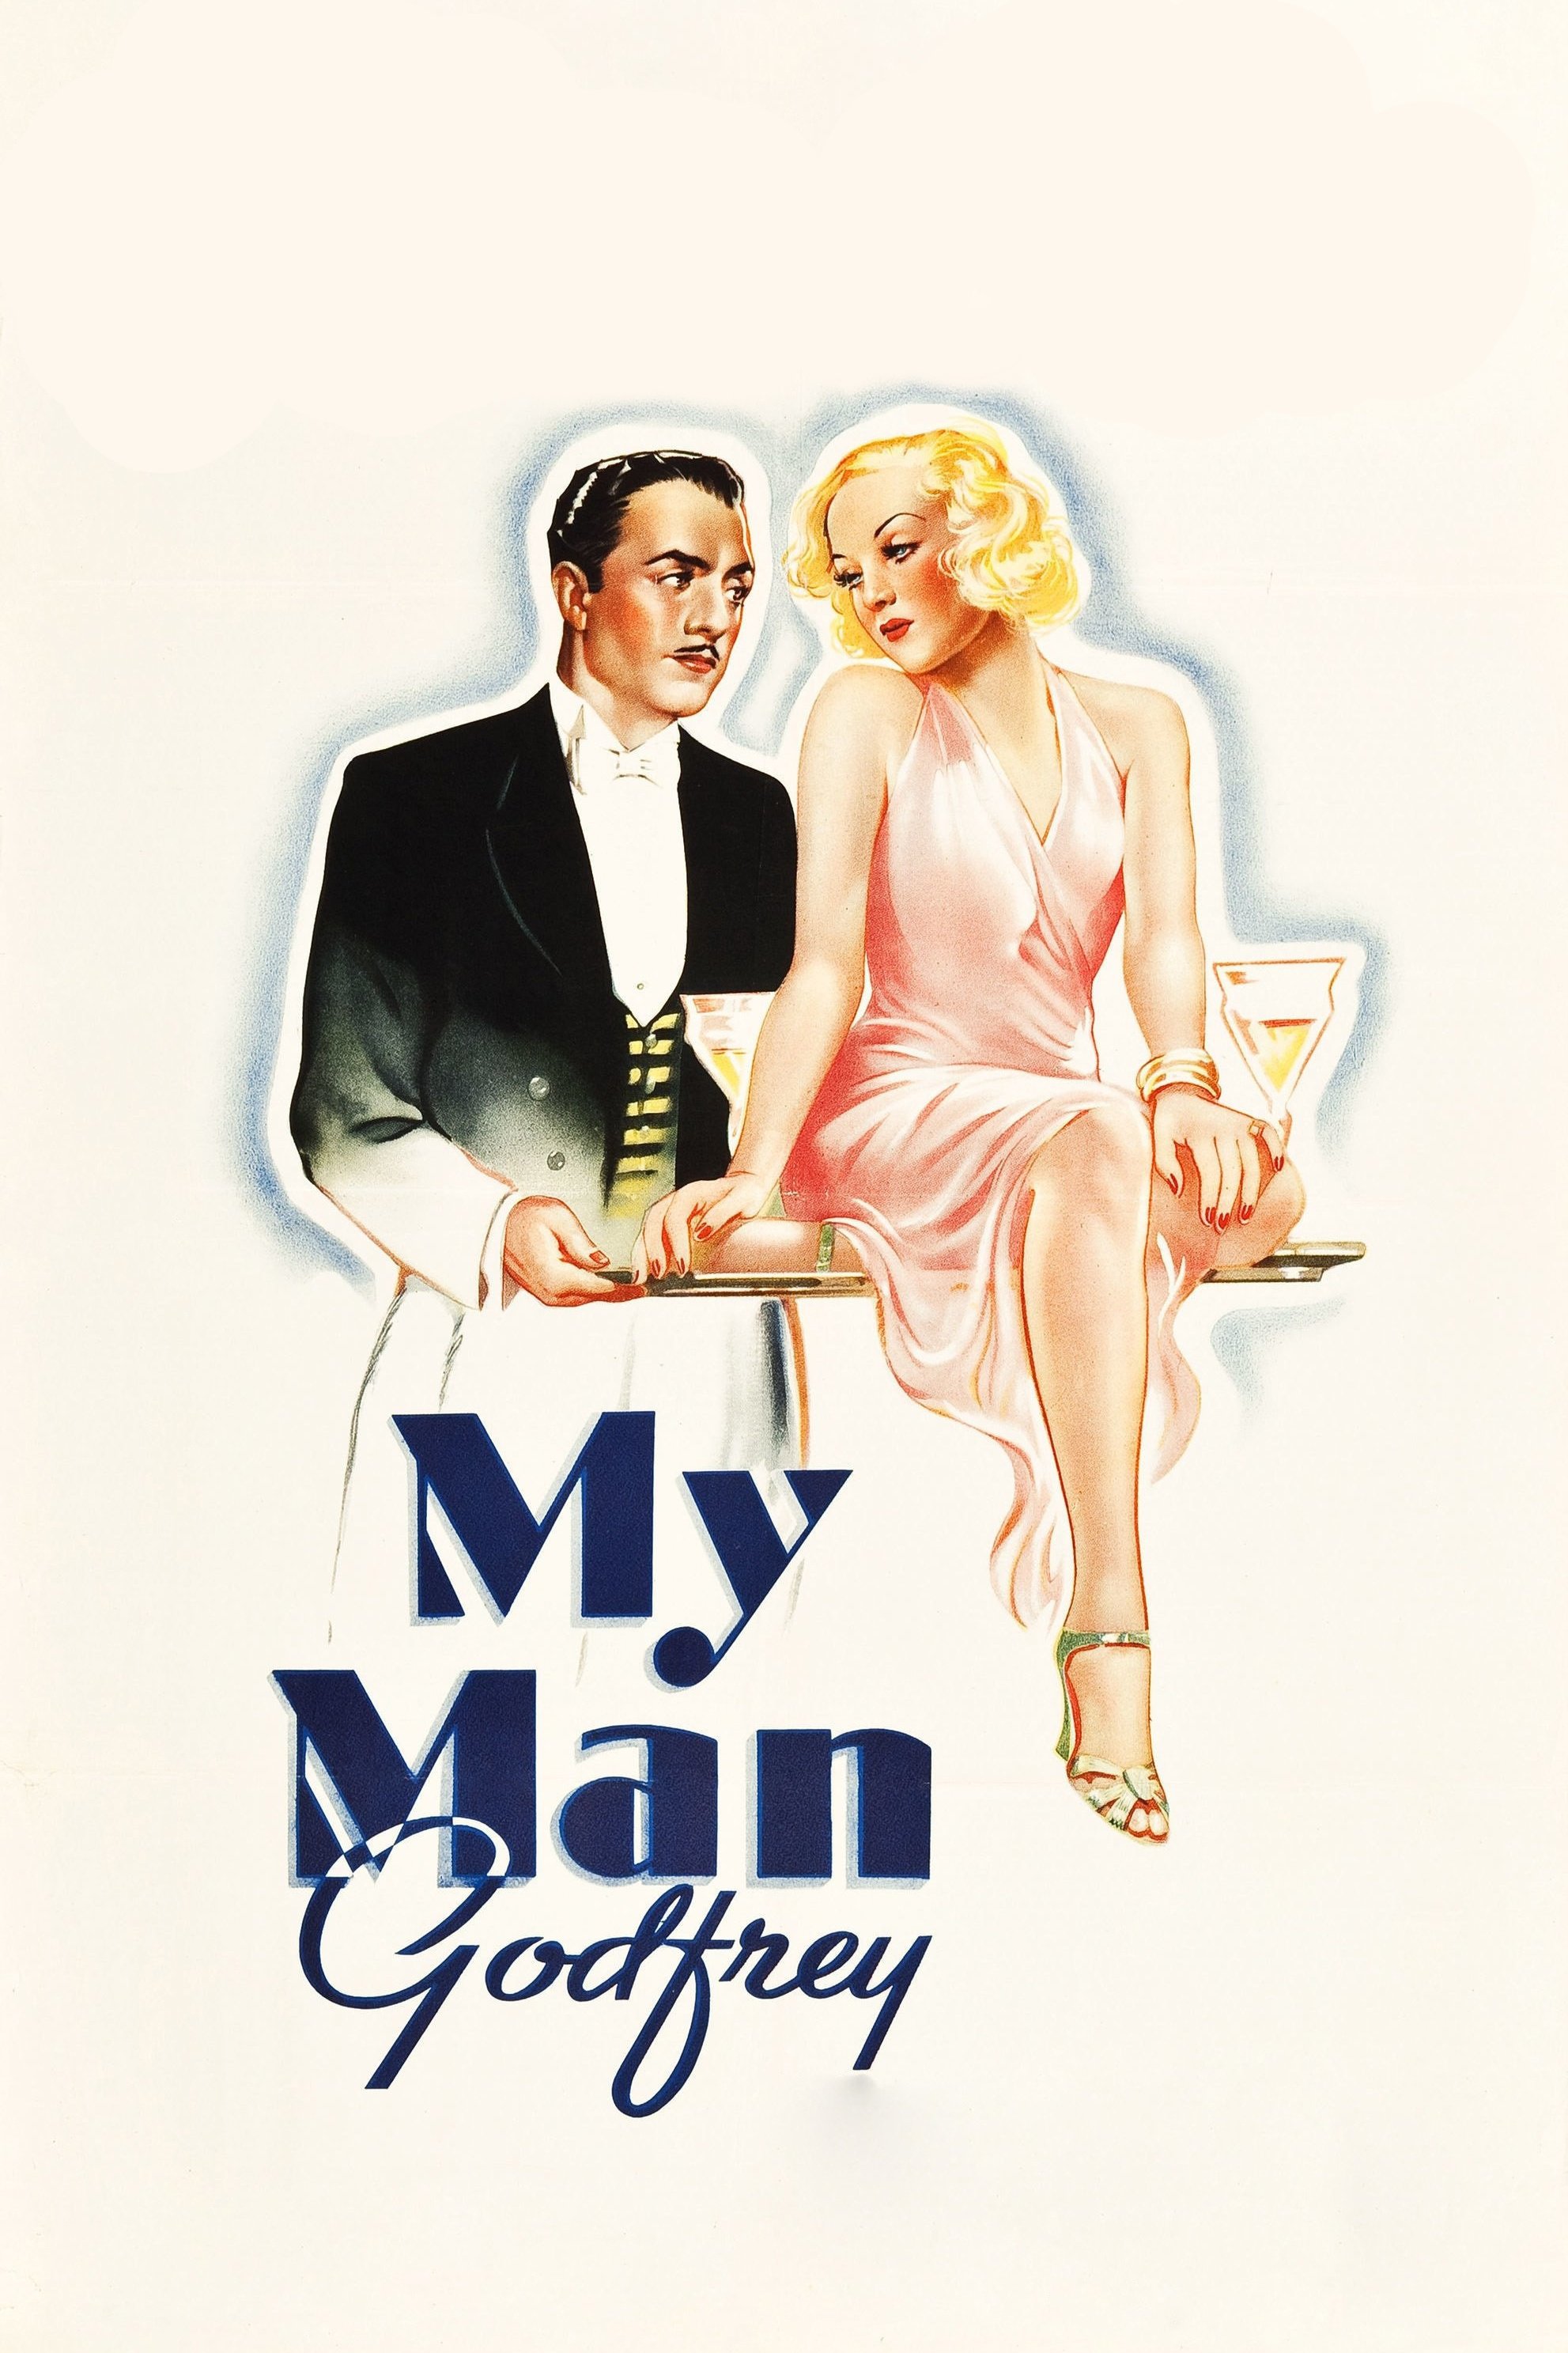 Poster for the movie "My Man Godfrey"